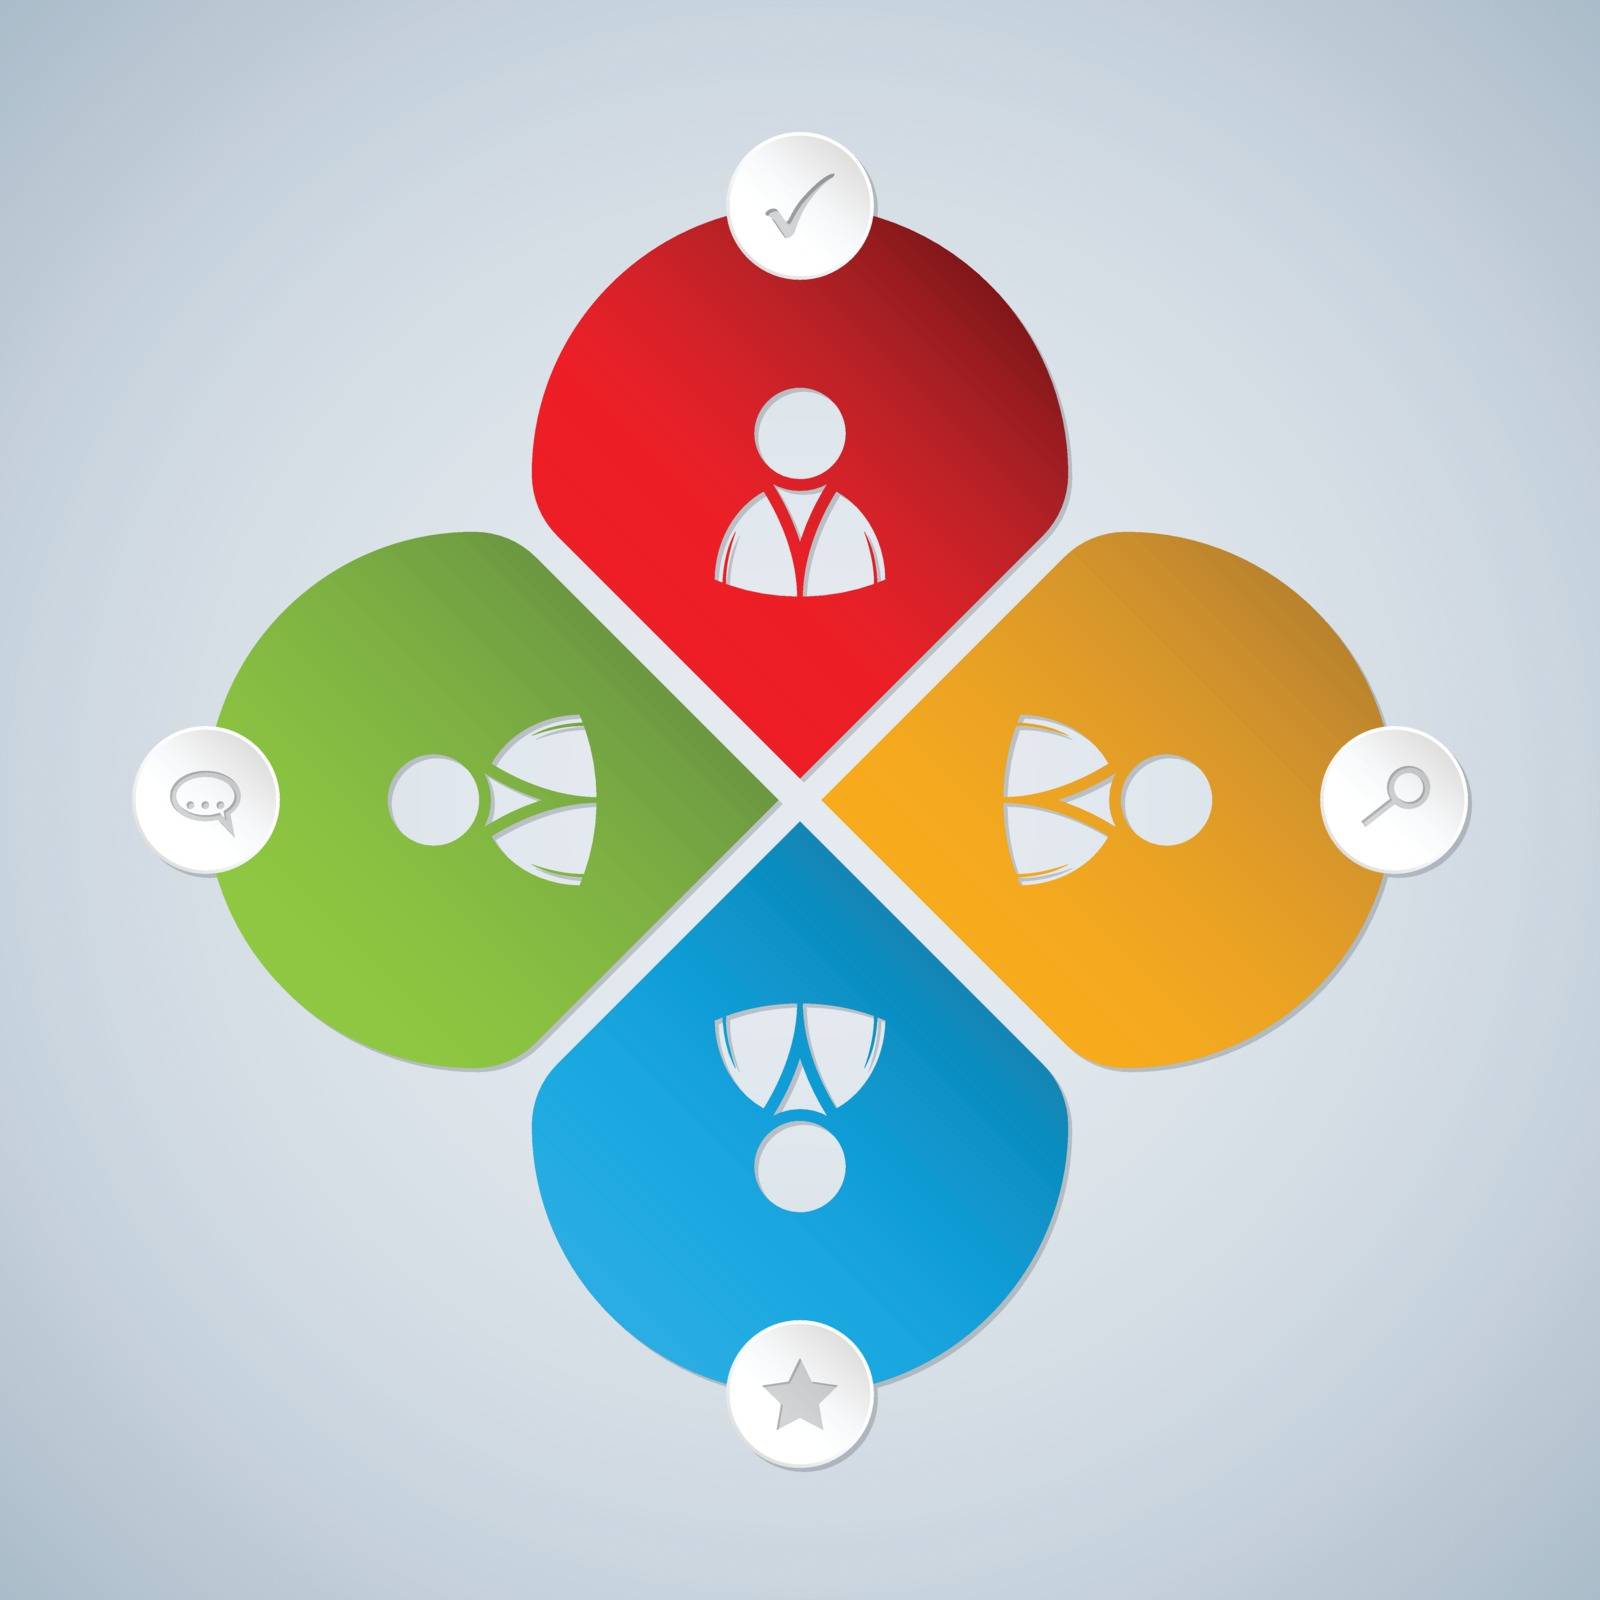 Basic social networking options icon set with person symbol